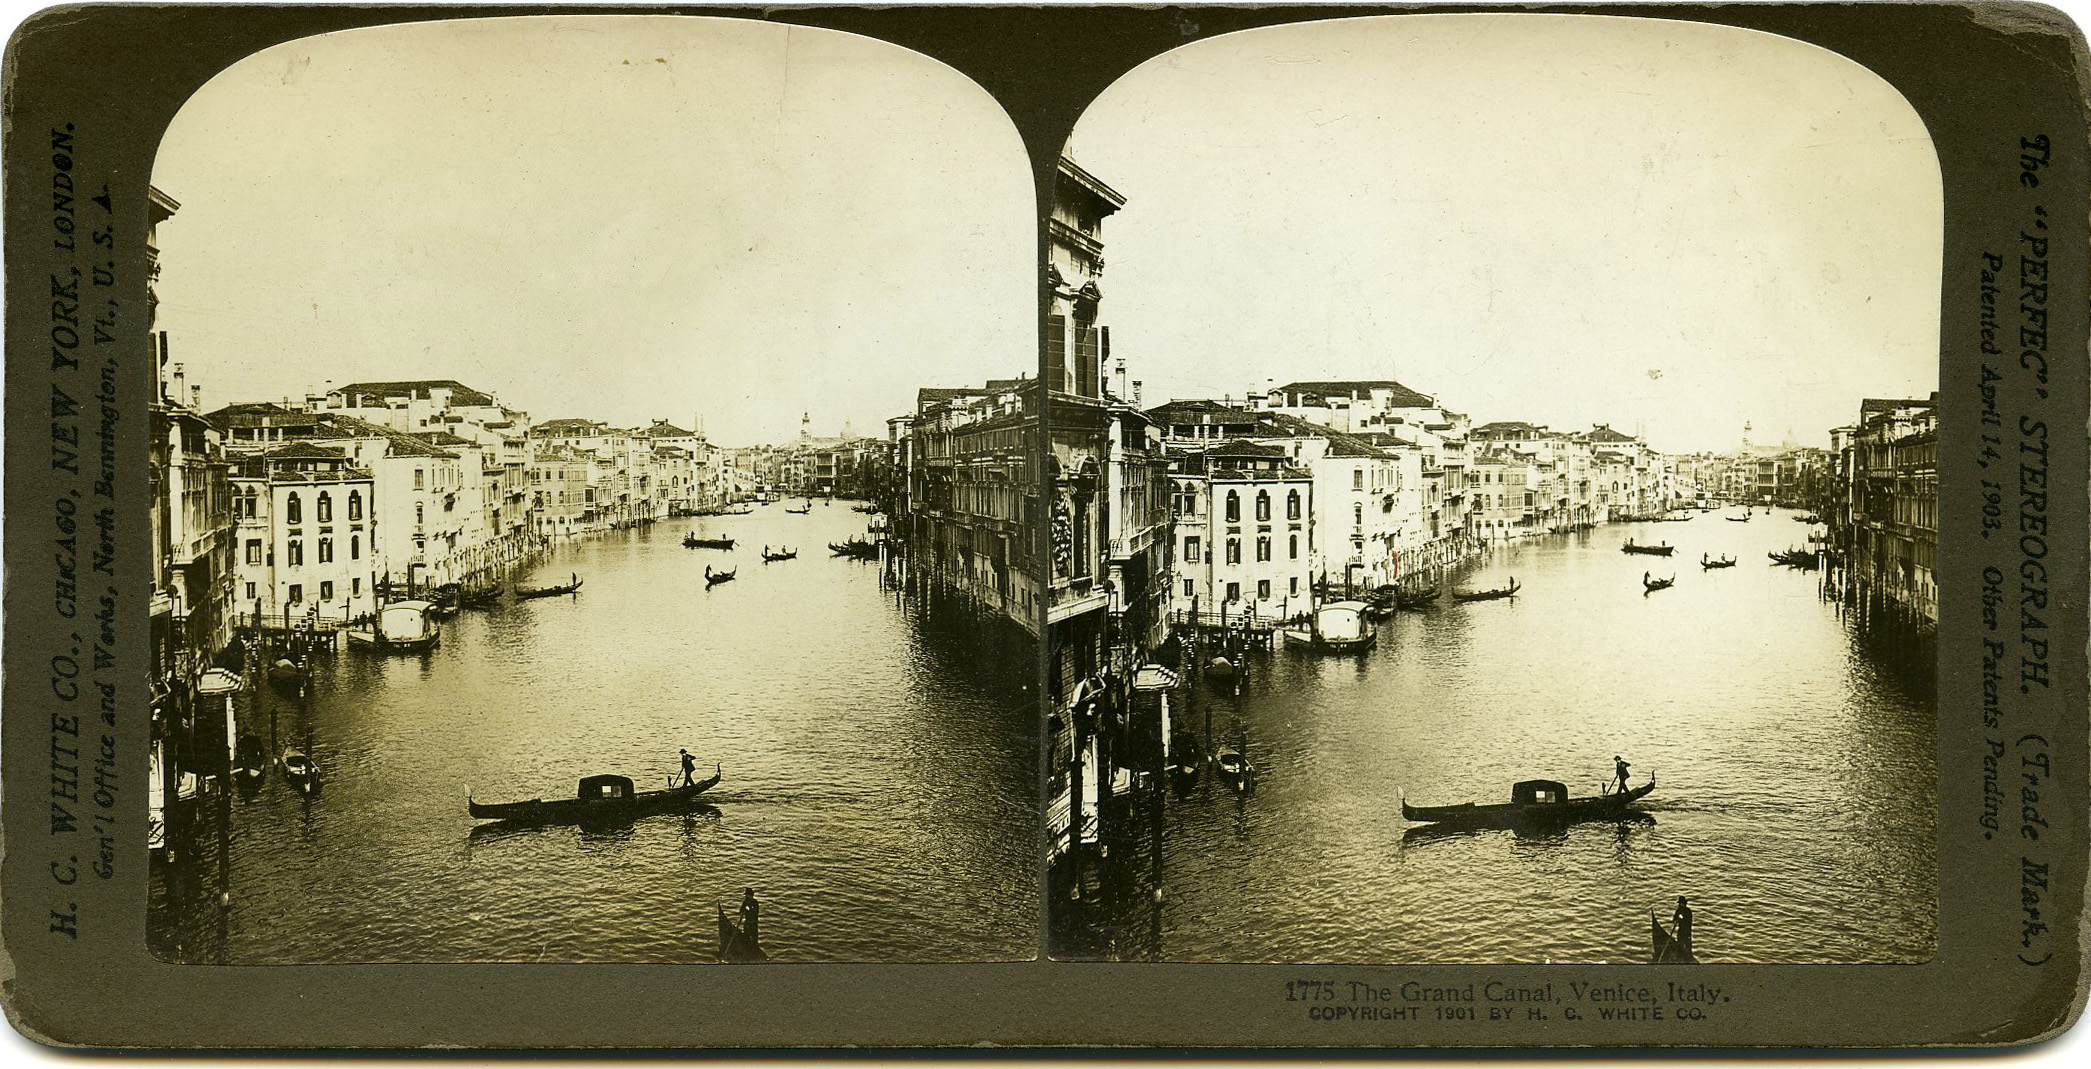 The topic of Stereoscopic Photography is Grand Canal, Italy.